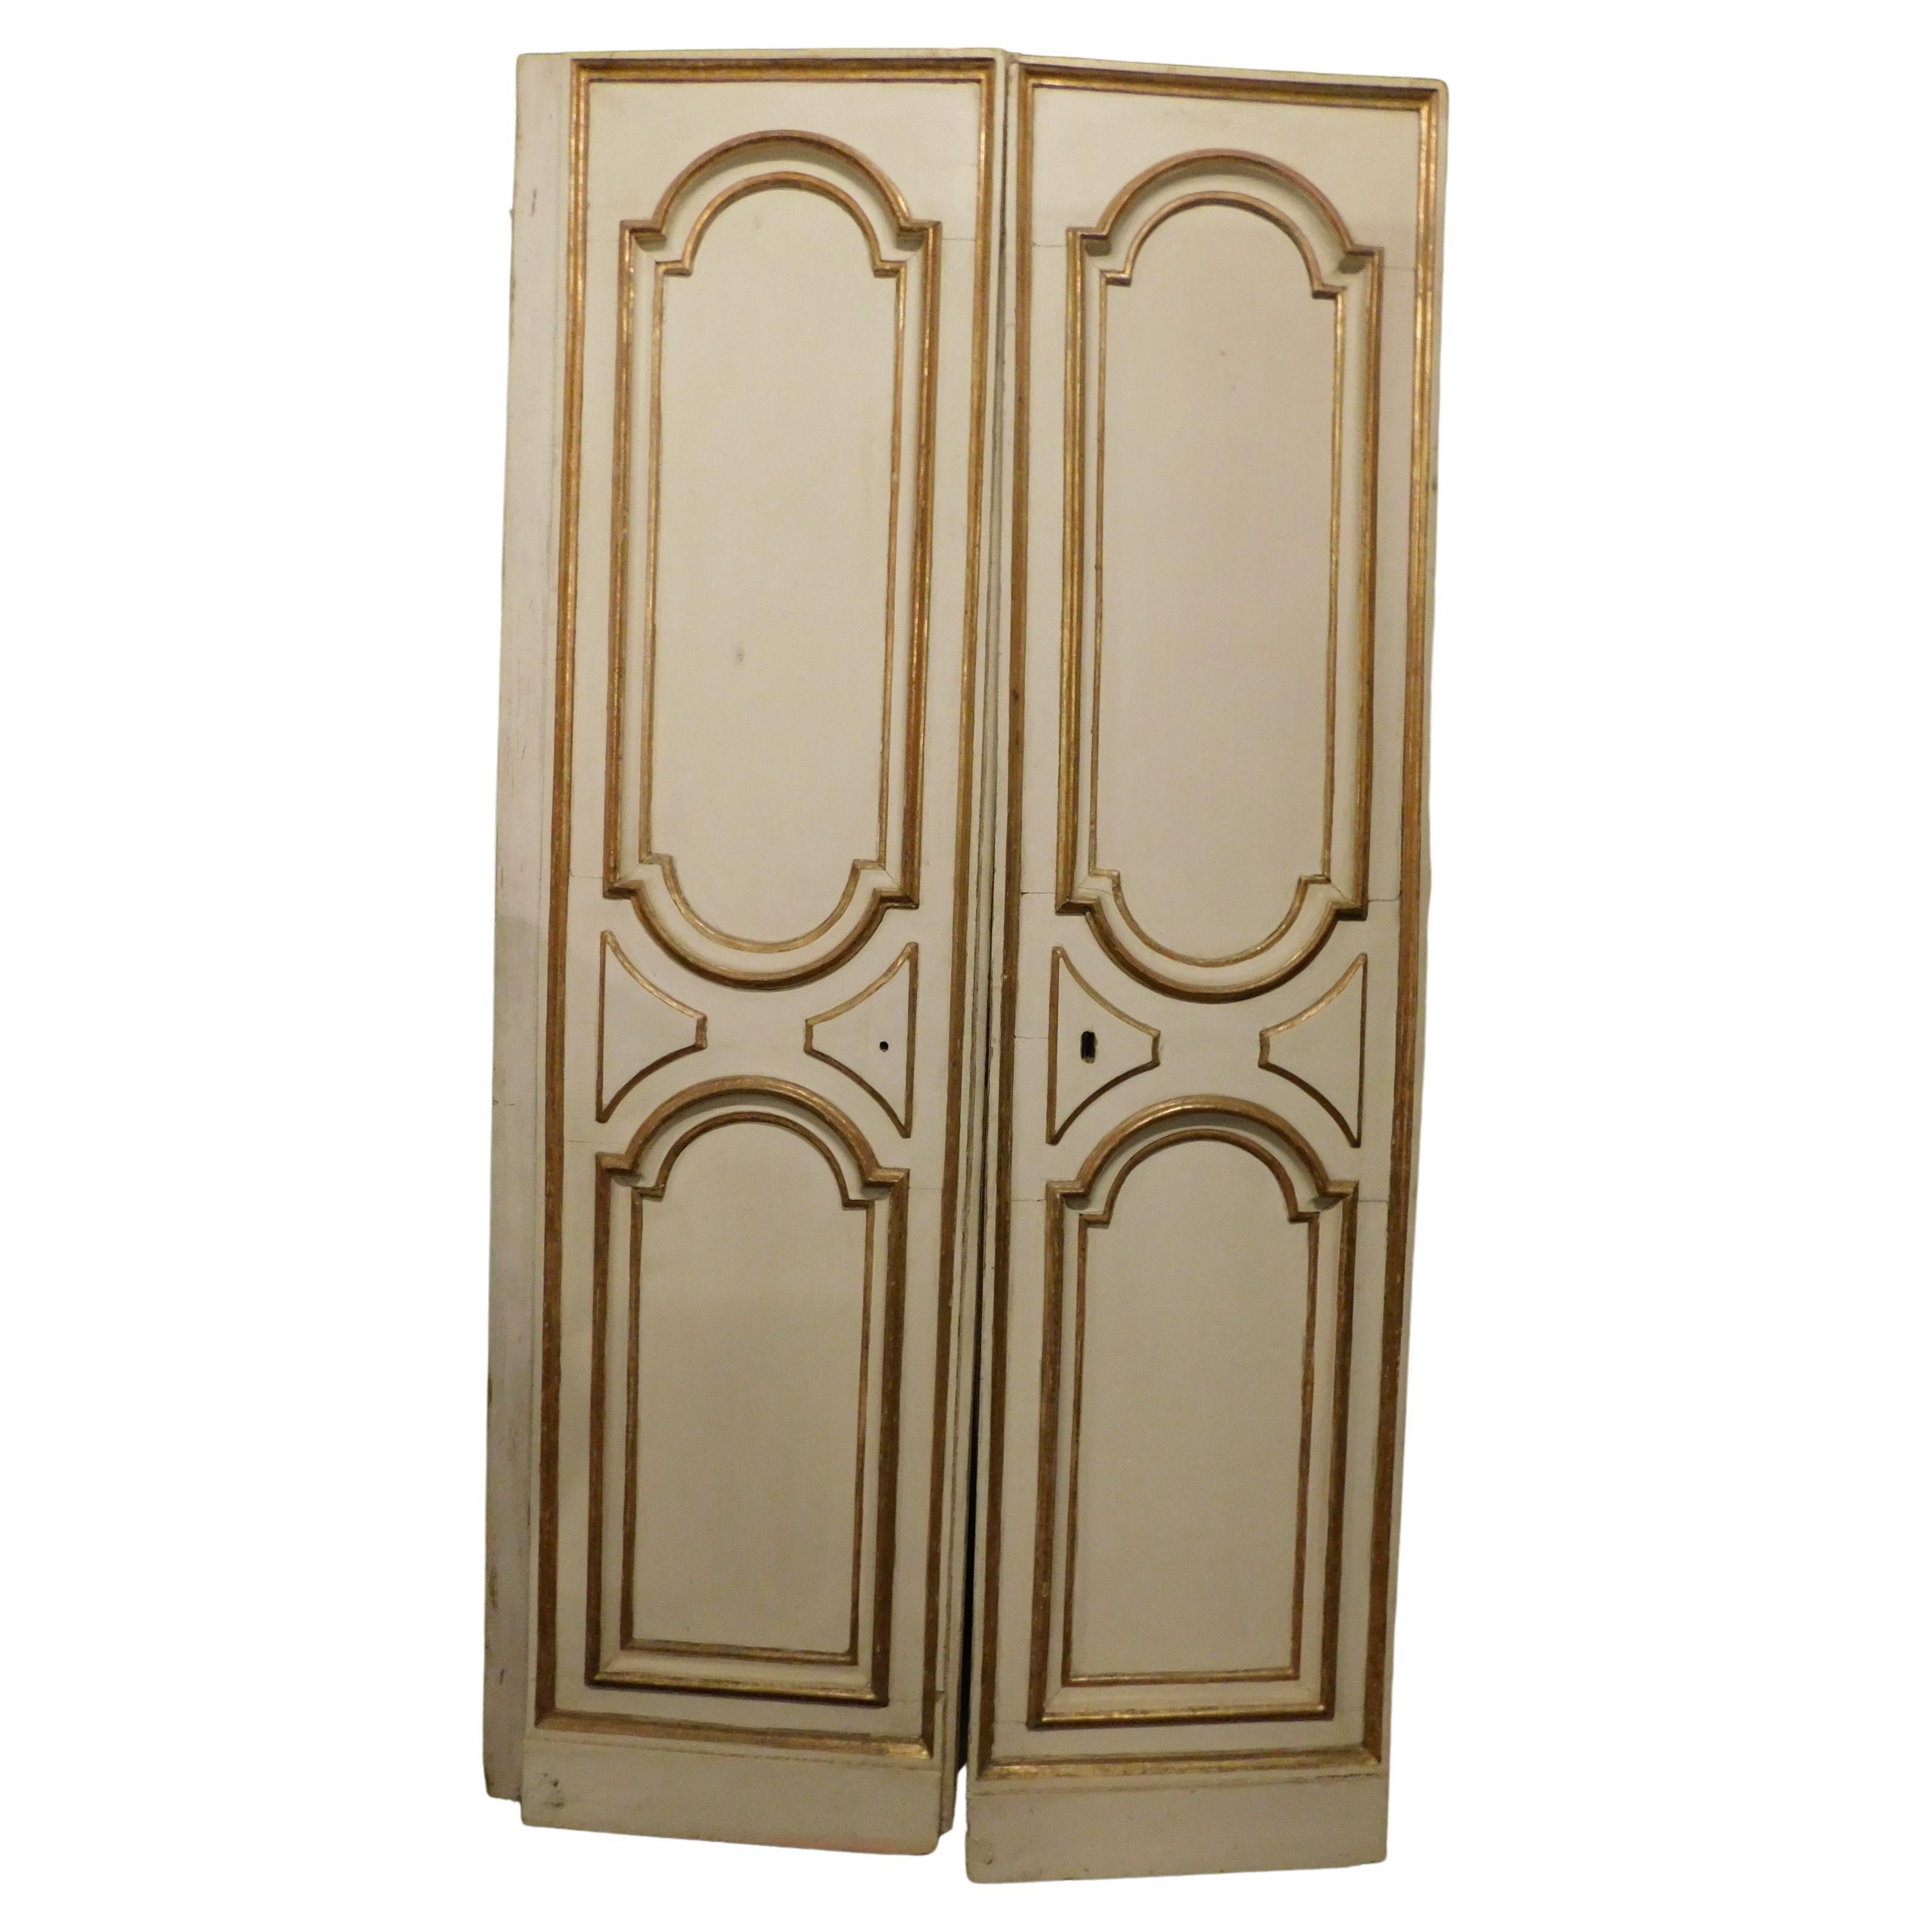 Antique White Hand Lacquered Door with Golden Molure, 18th Century Italy For Sale